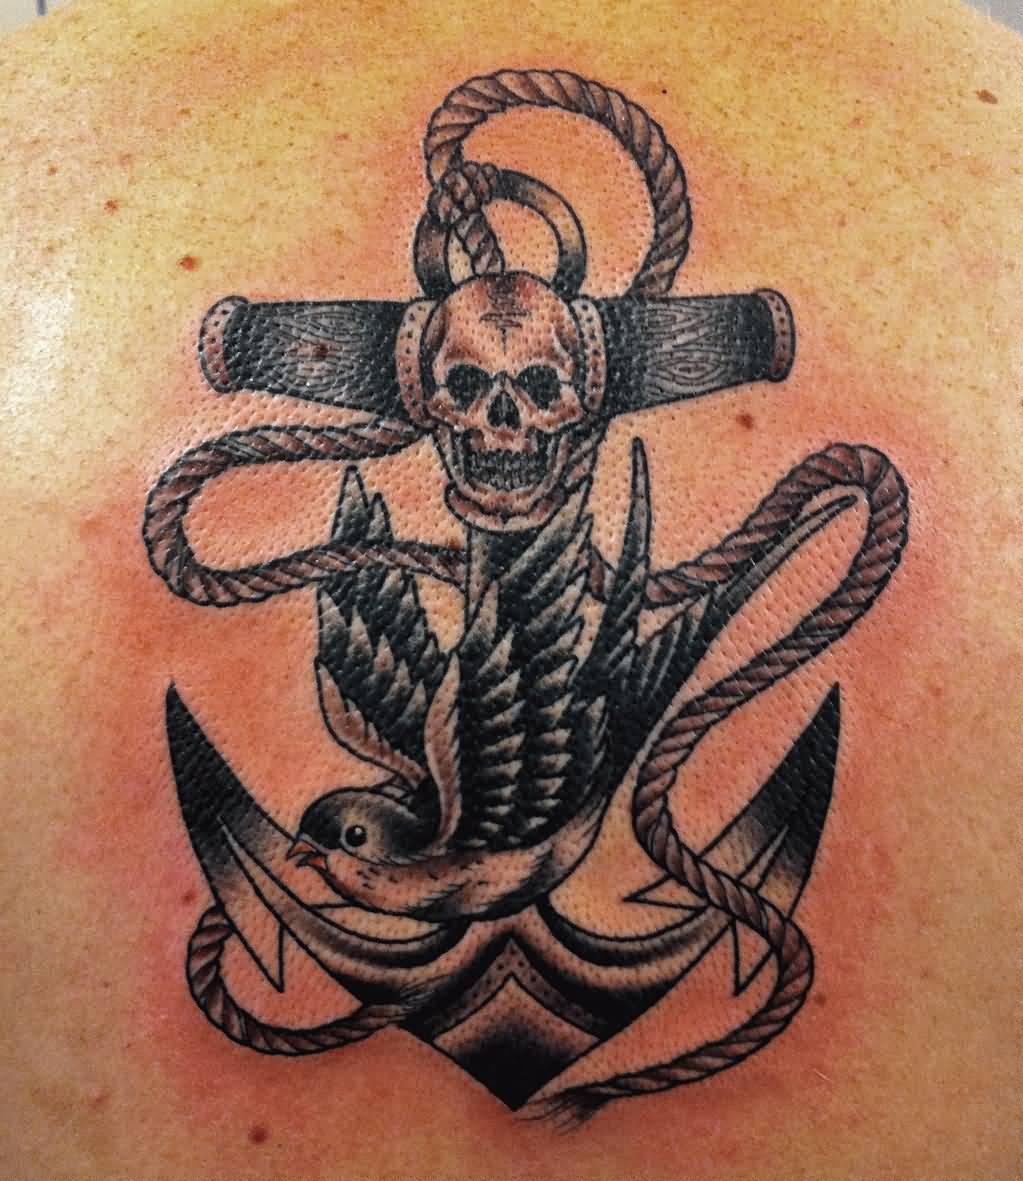 Black Ink Pirate Anchor With Flying Bird Tattoo Design